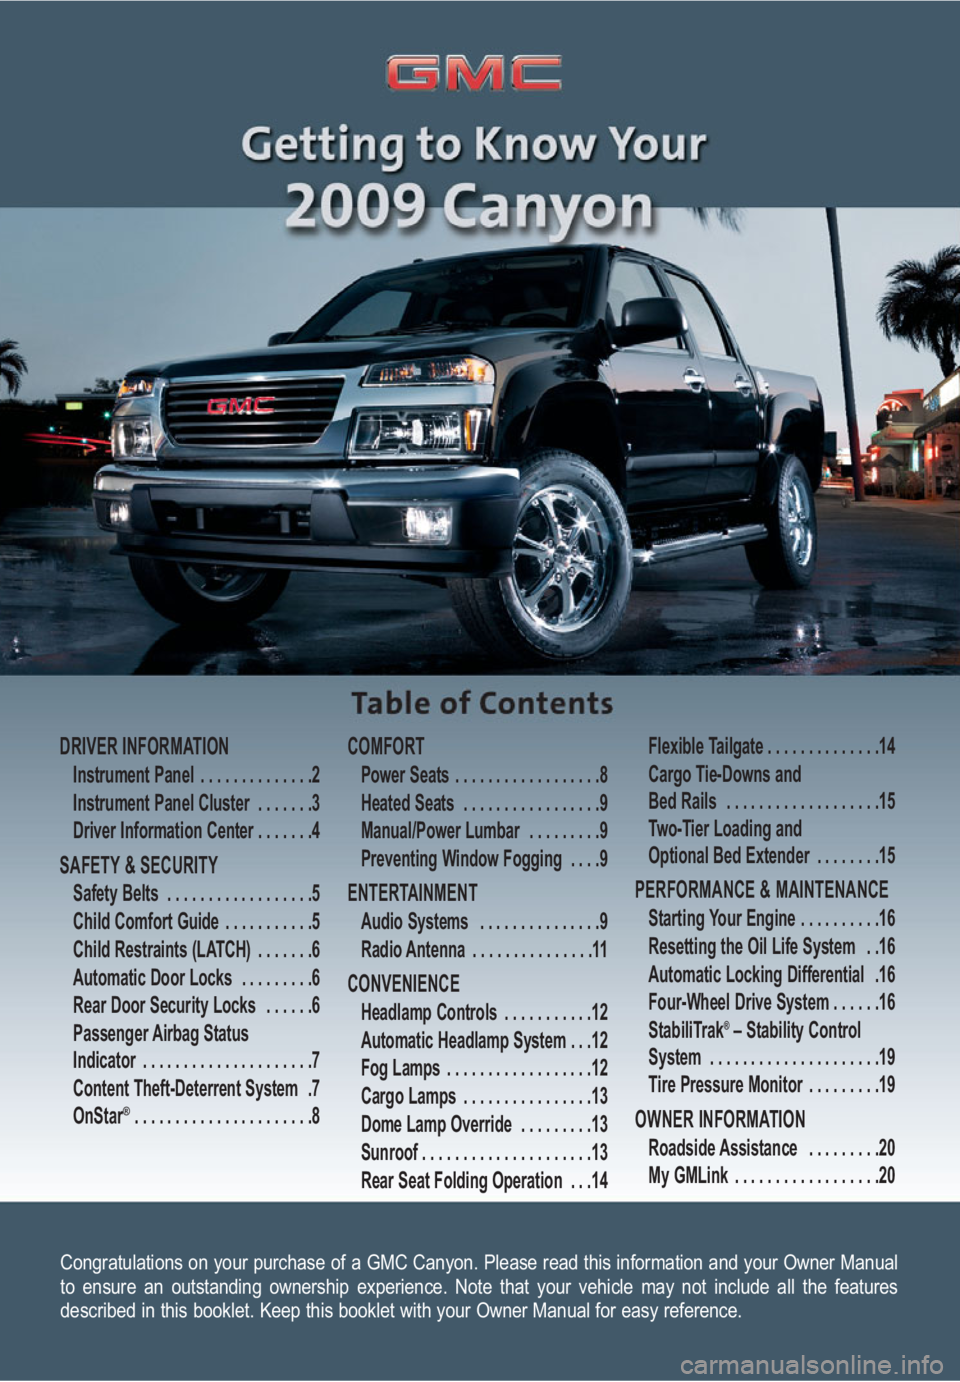 GMC CANYON 2009  Get To Know Guide Congratulations on your purchase of a GMC Canyon. Please read this information and your Owner Manual
to ensure an outstanding ownership experience. Note that your vehicle may not include all the featu